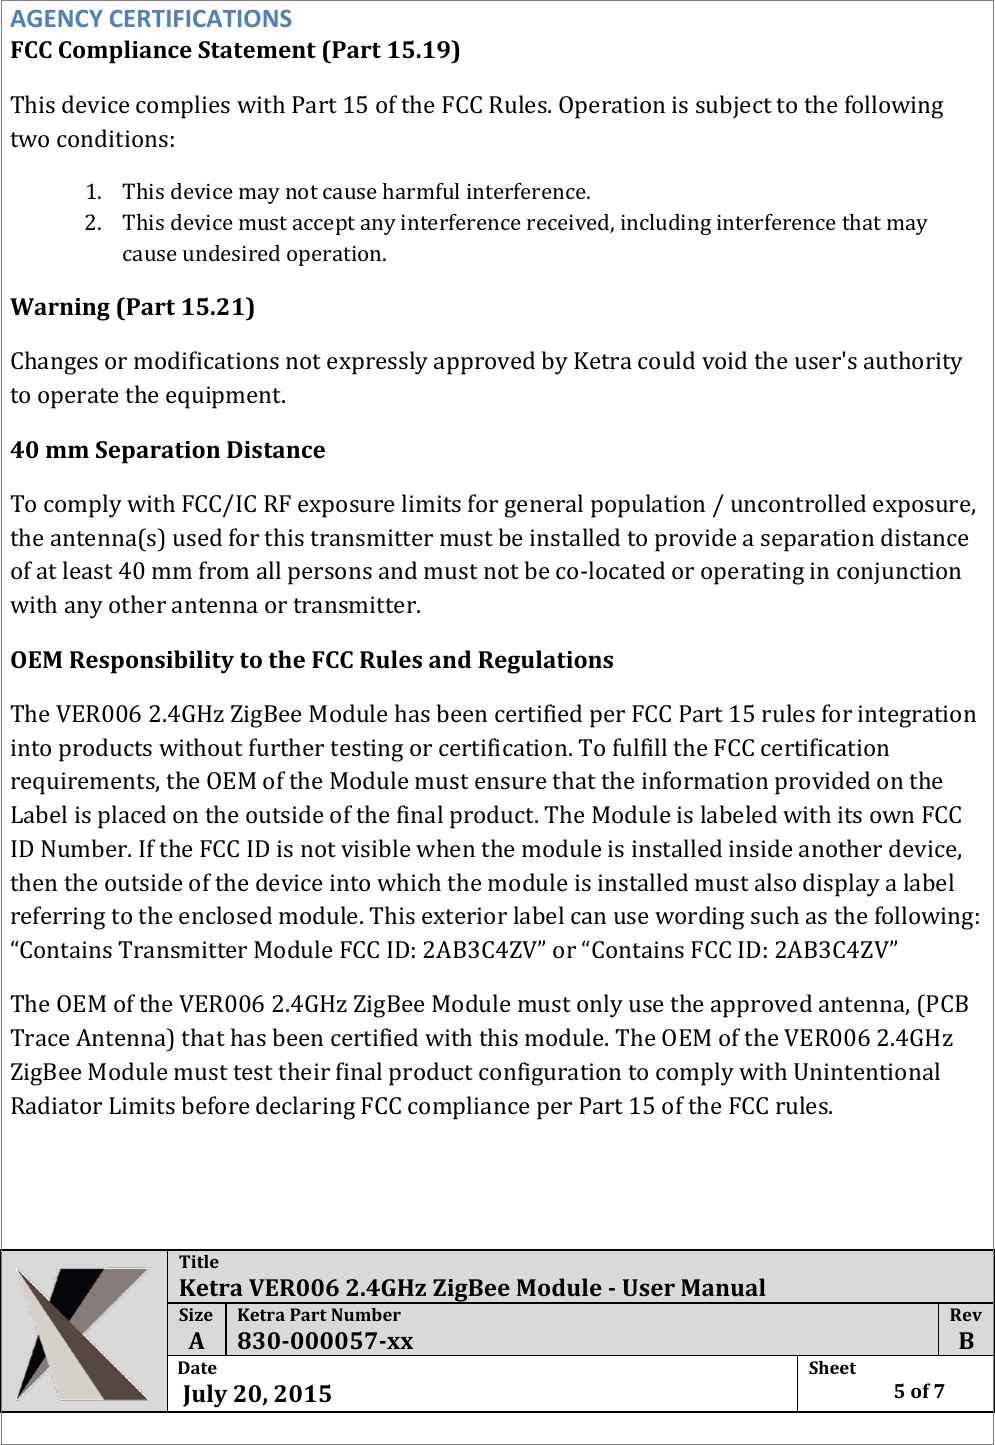  Title Ketra VER006 2.4GHz ZigBee Module - User Manual Size  A Ketra Part Number 830-000057-xx Rev  B Date   July 20, 2015 Sheet    5 of 7  AGENCY CERTIFICATIONS FCC Compliance Statement (Part 15.19)  This device complies with Part 15 of the FCC Rules. Operation is subject to the following two conditions: 1. This device may not cause harmful interference. 2. This device must accept any interference received, including interference that may cause undesired operation. Warning (Part 15.21) Changes or modifications not expressly approved by Ketra could void the user&apos;s authority to operate the equipment. 40 mm Separation Distance To comply with FCC/IC RF exposure limits for general population / uncontrolled exposure, the antenna(s) used for this transmitter must be installed to provide a separation distance of at least 40 mm from all persons and must not be co-located or operating in conjunction with any other antenna or transmitter. OEM Responsibility to the FCC Rules and Regulations The VER006 2.4GHz ZigBee Module has been certified per FCC Part 15 rules for integration into products without further testing or certification. To fulfill the FCC certification requirements, the OEM of the Module must ensure that the information provided on the Label is placed on the outside of the final product. The Module is labeled with its own FCC ID Number. If the FCC ID is not visible when the module is installed inside another device, then the outside of the device into which the module is installed must also display a label referring to the enclosed module. This exterior label can use wording such as the following: “Contains Transmitter Module FCC ID: 2AB3C4ZV” or “Contains FCC ID: 2AB3C4ZV” The OEM of the VER006 2.4GHz ZigBee Module must only use the approved antenna, (PCB Trace Antenna) that has been certified with this module. The OEM of the VER006 2.4GHz ZigBee Module must test their final product configuration to comply with Unintentional Radiator Limits before declaring FCC compliance per Part 15 of the FCC rules.     